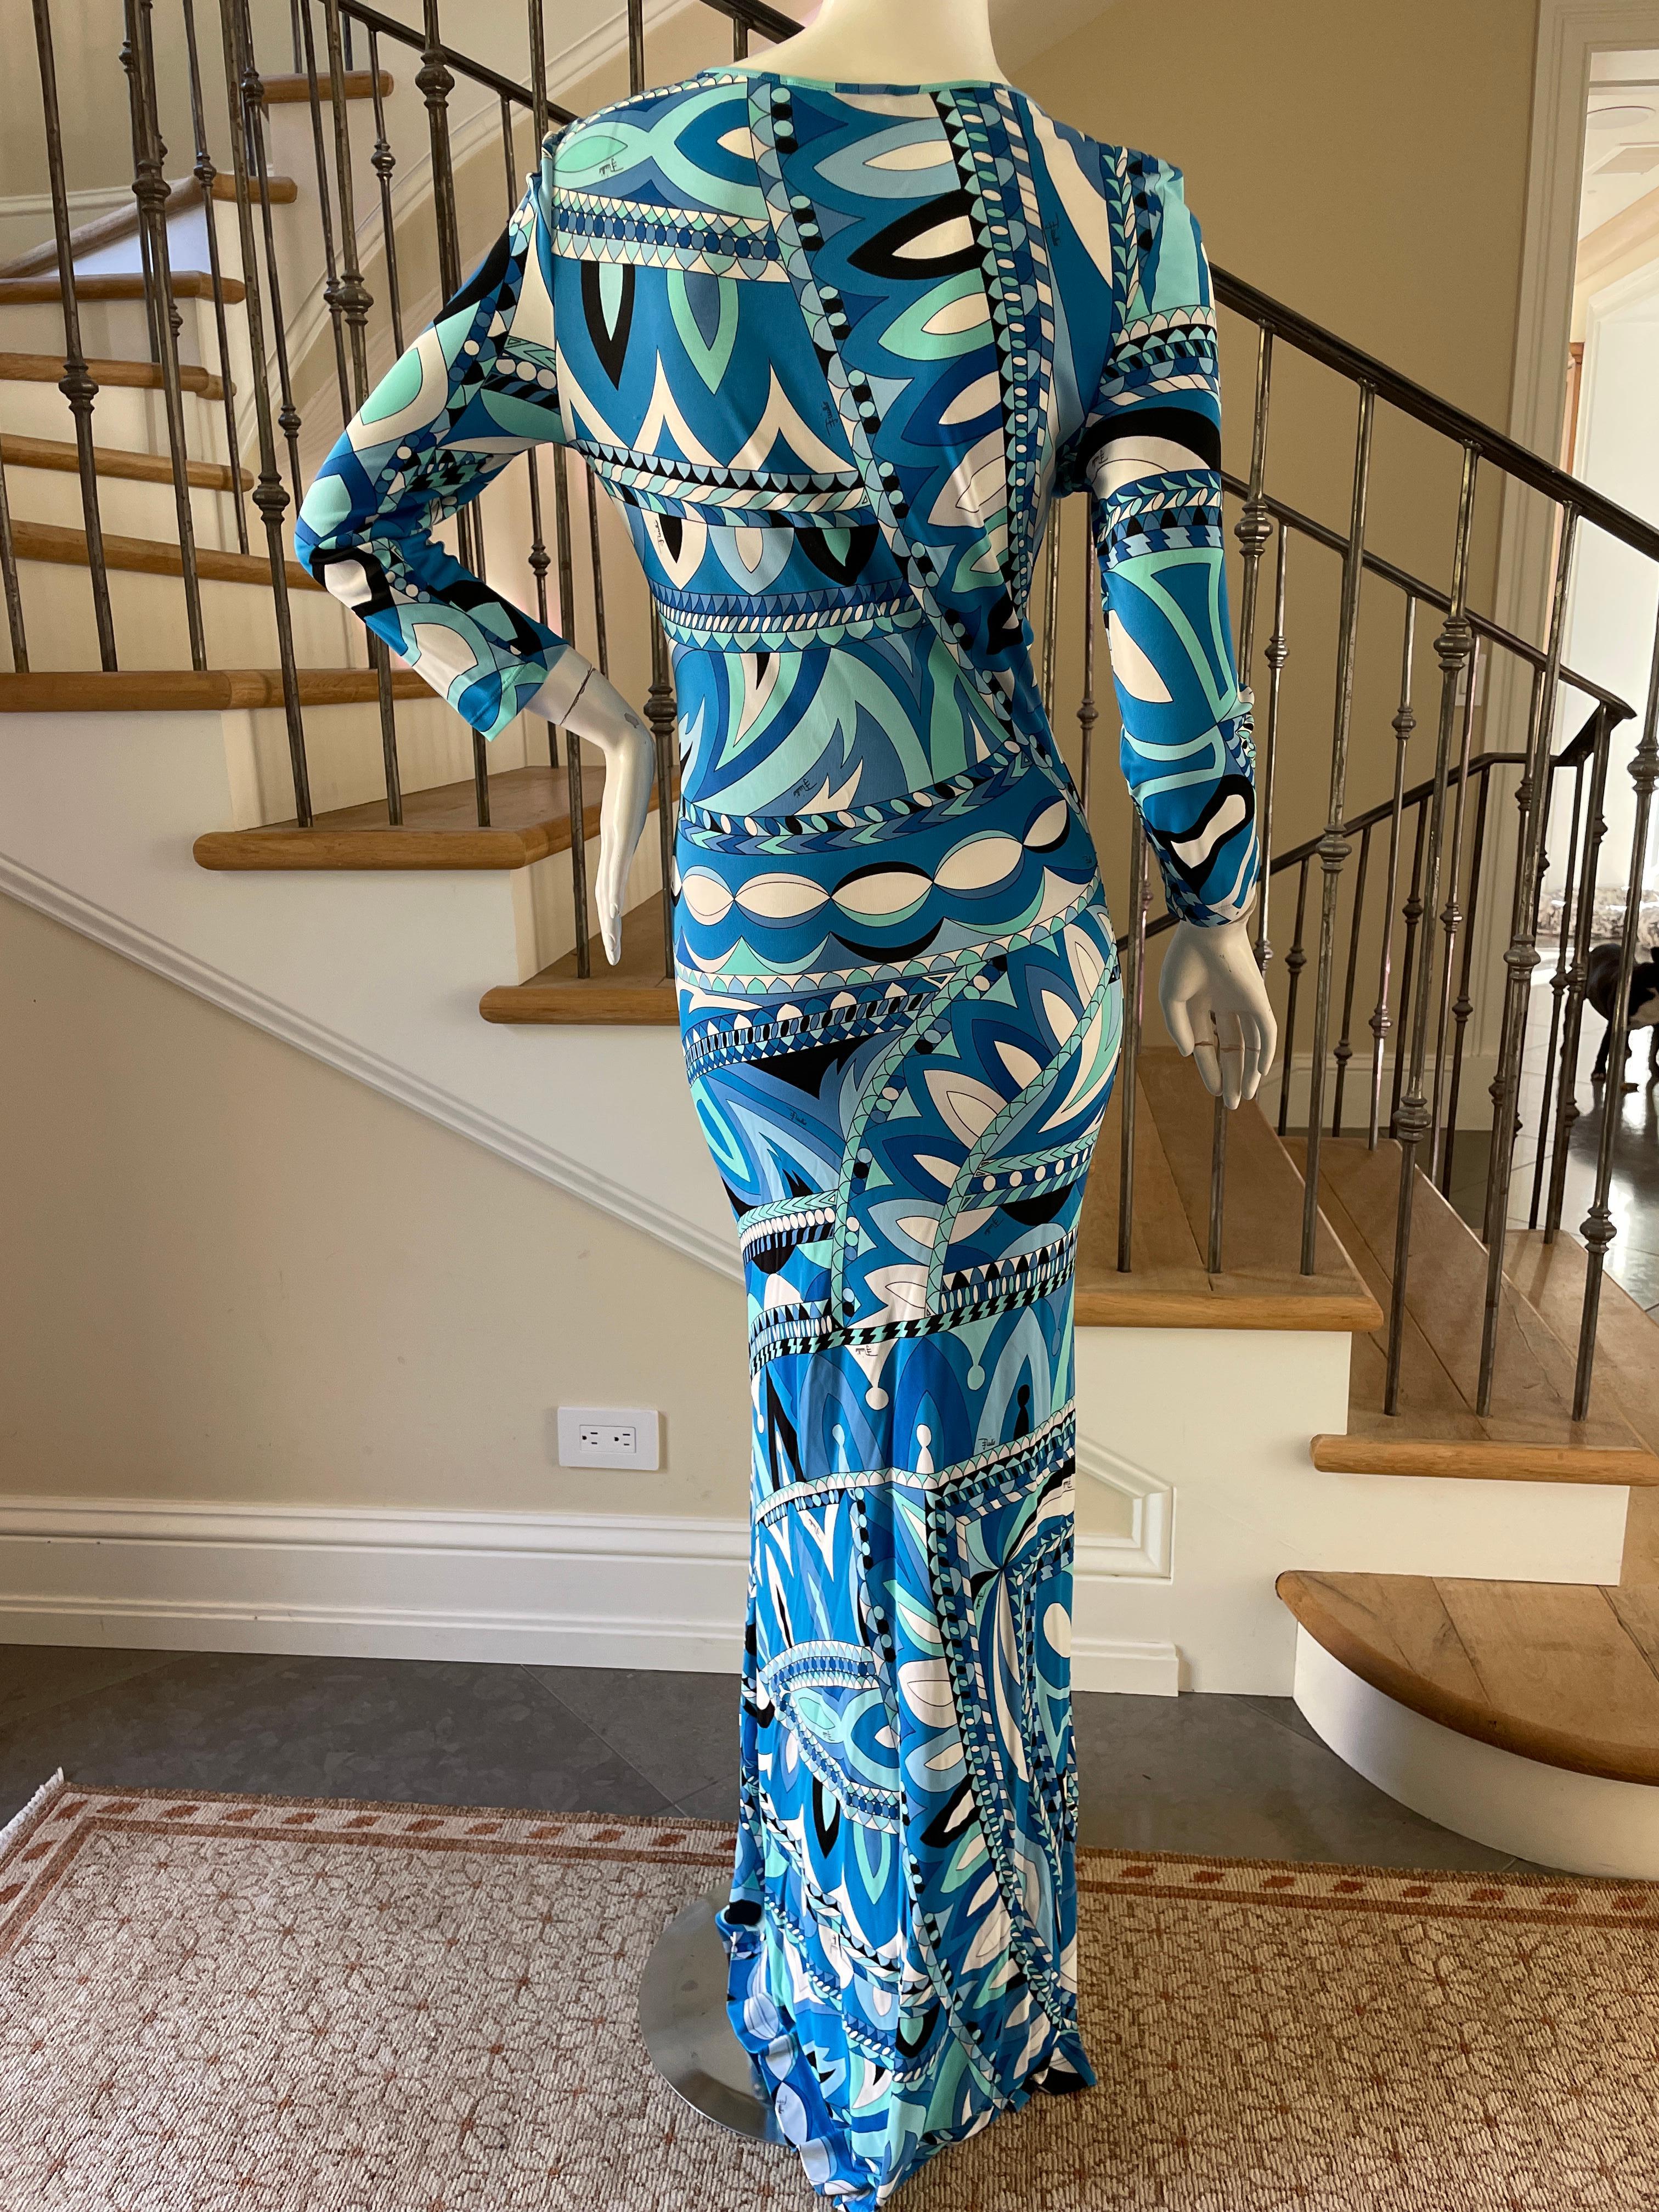 Emilio Pucci Chic Plunging Vintage Long Sleeve Maxi Dress
This is so much prettier in person, please use the zoom feature to see details.
Size 6/8  38 IT, runs large, with lots of stretch
Bust 39